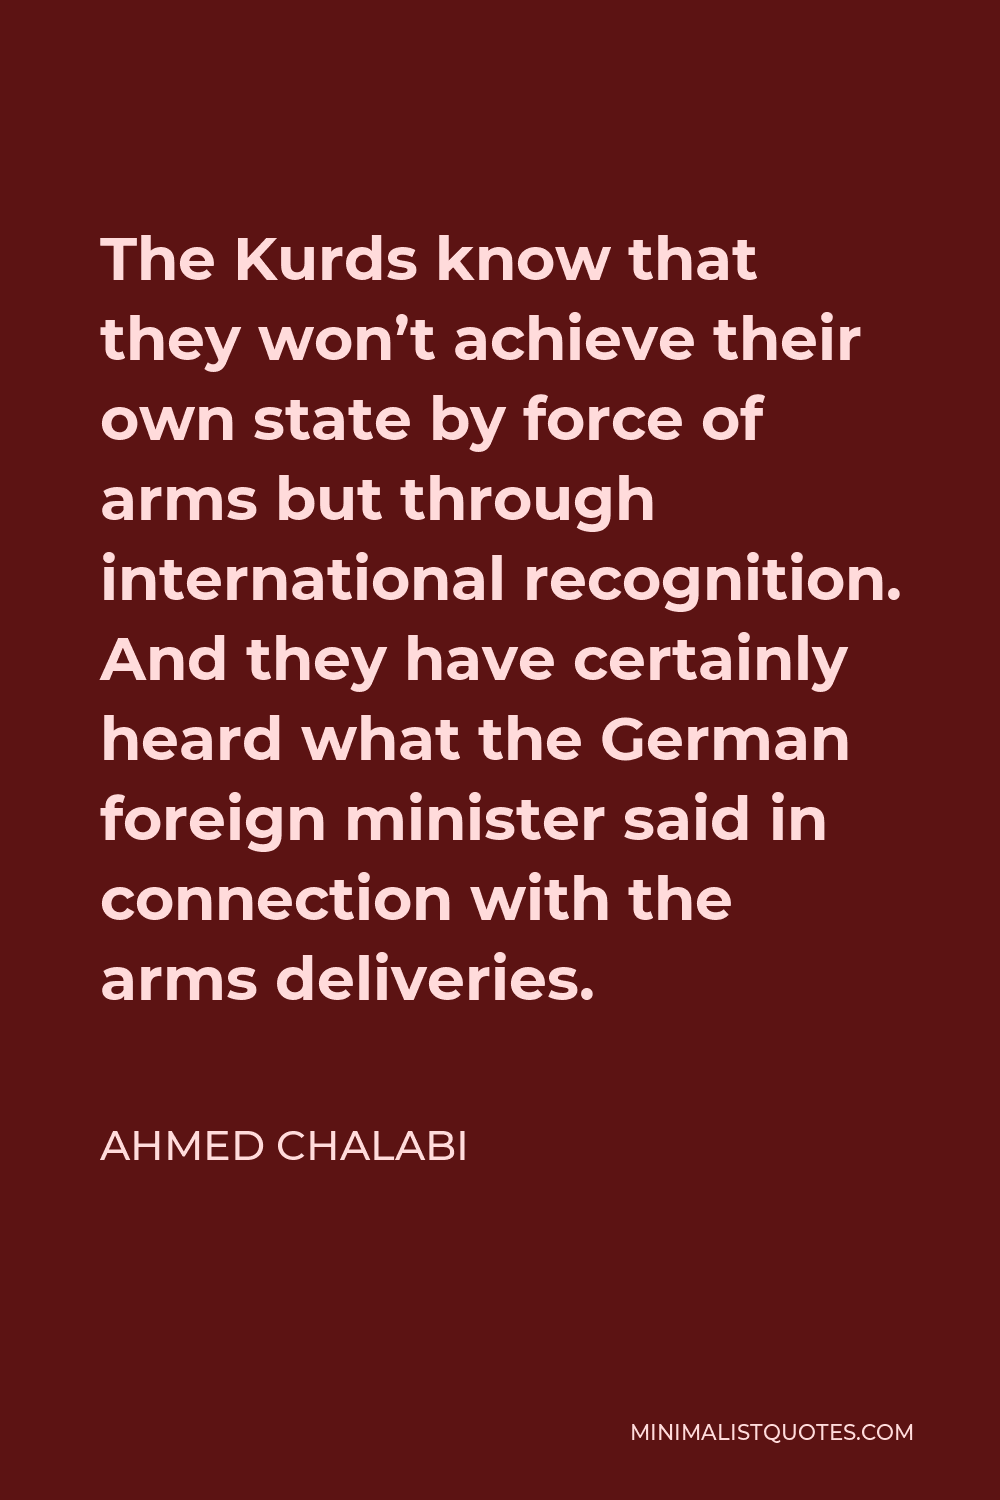 Ahmed Chalabi Quote - The Kurds know that they won’t achieve their own state by force of arms but through international recognition. And they have certainly heard what the German foreign minister said in connection with the arms deliveries.